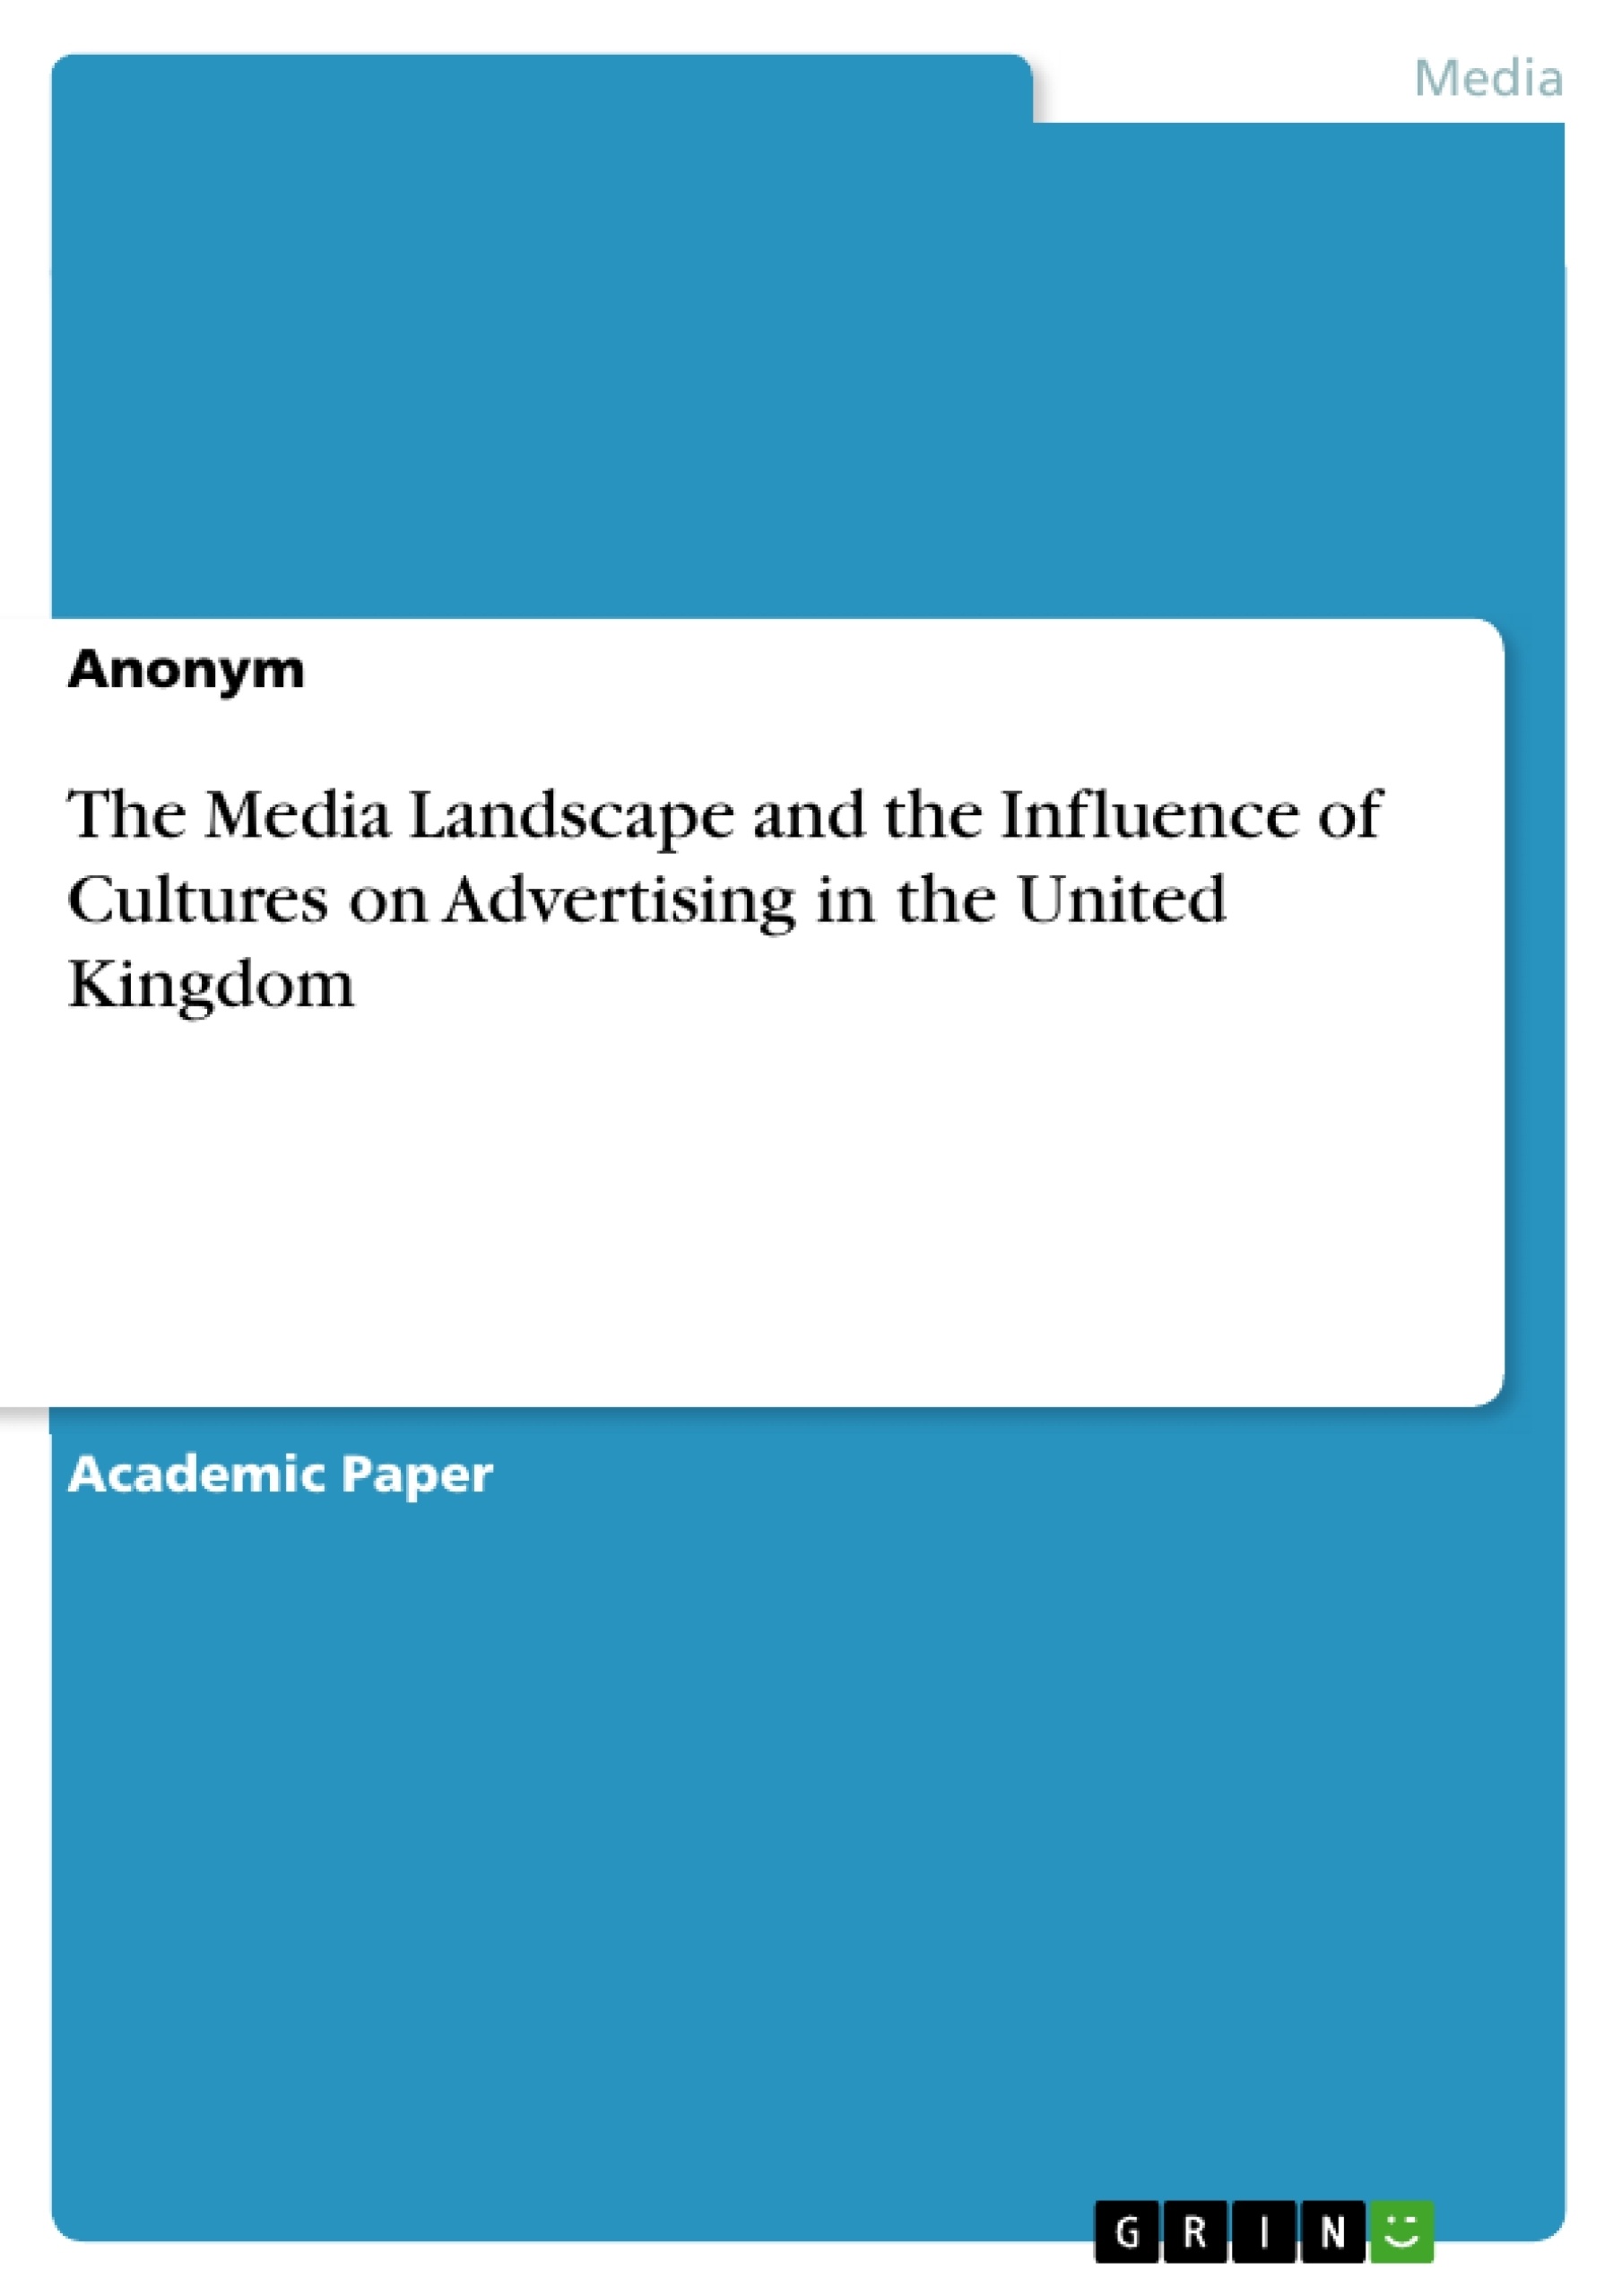 Title: The Media Landscape and the Influence of Cultures on Advertising in the United Kingdom